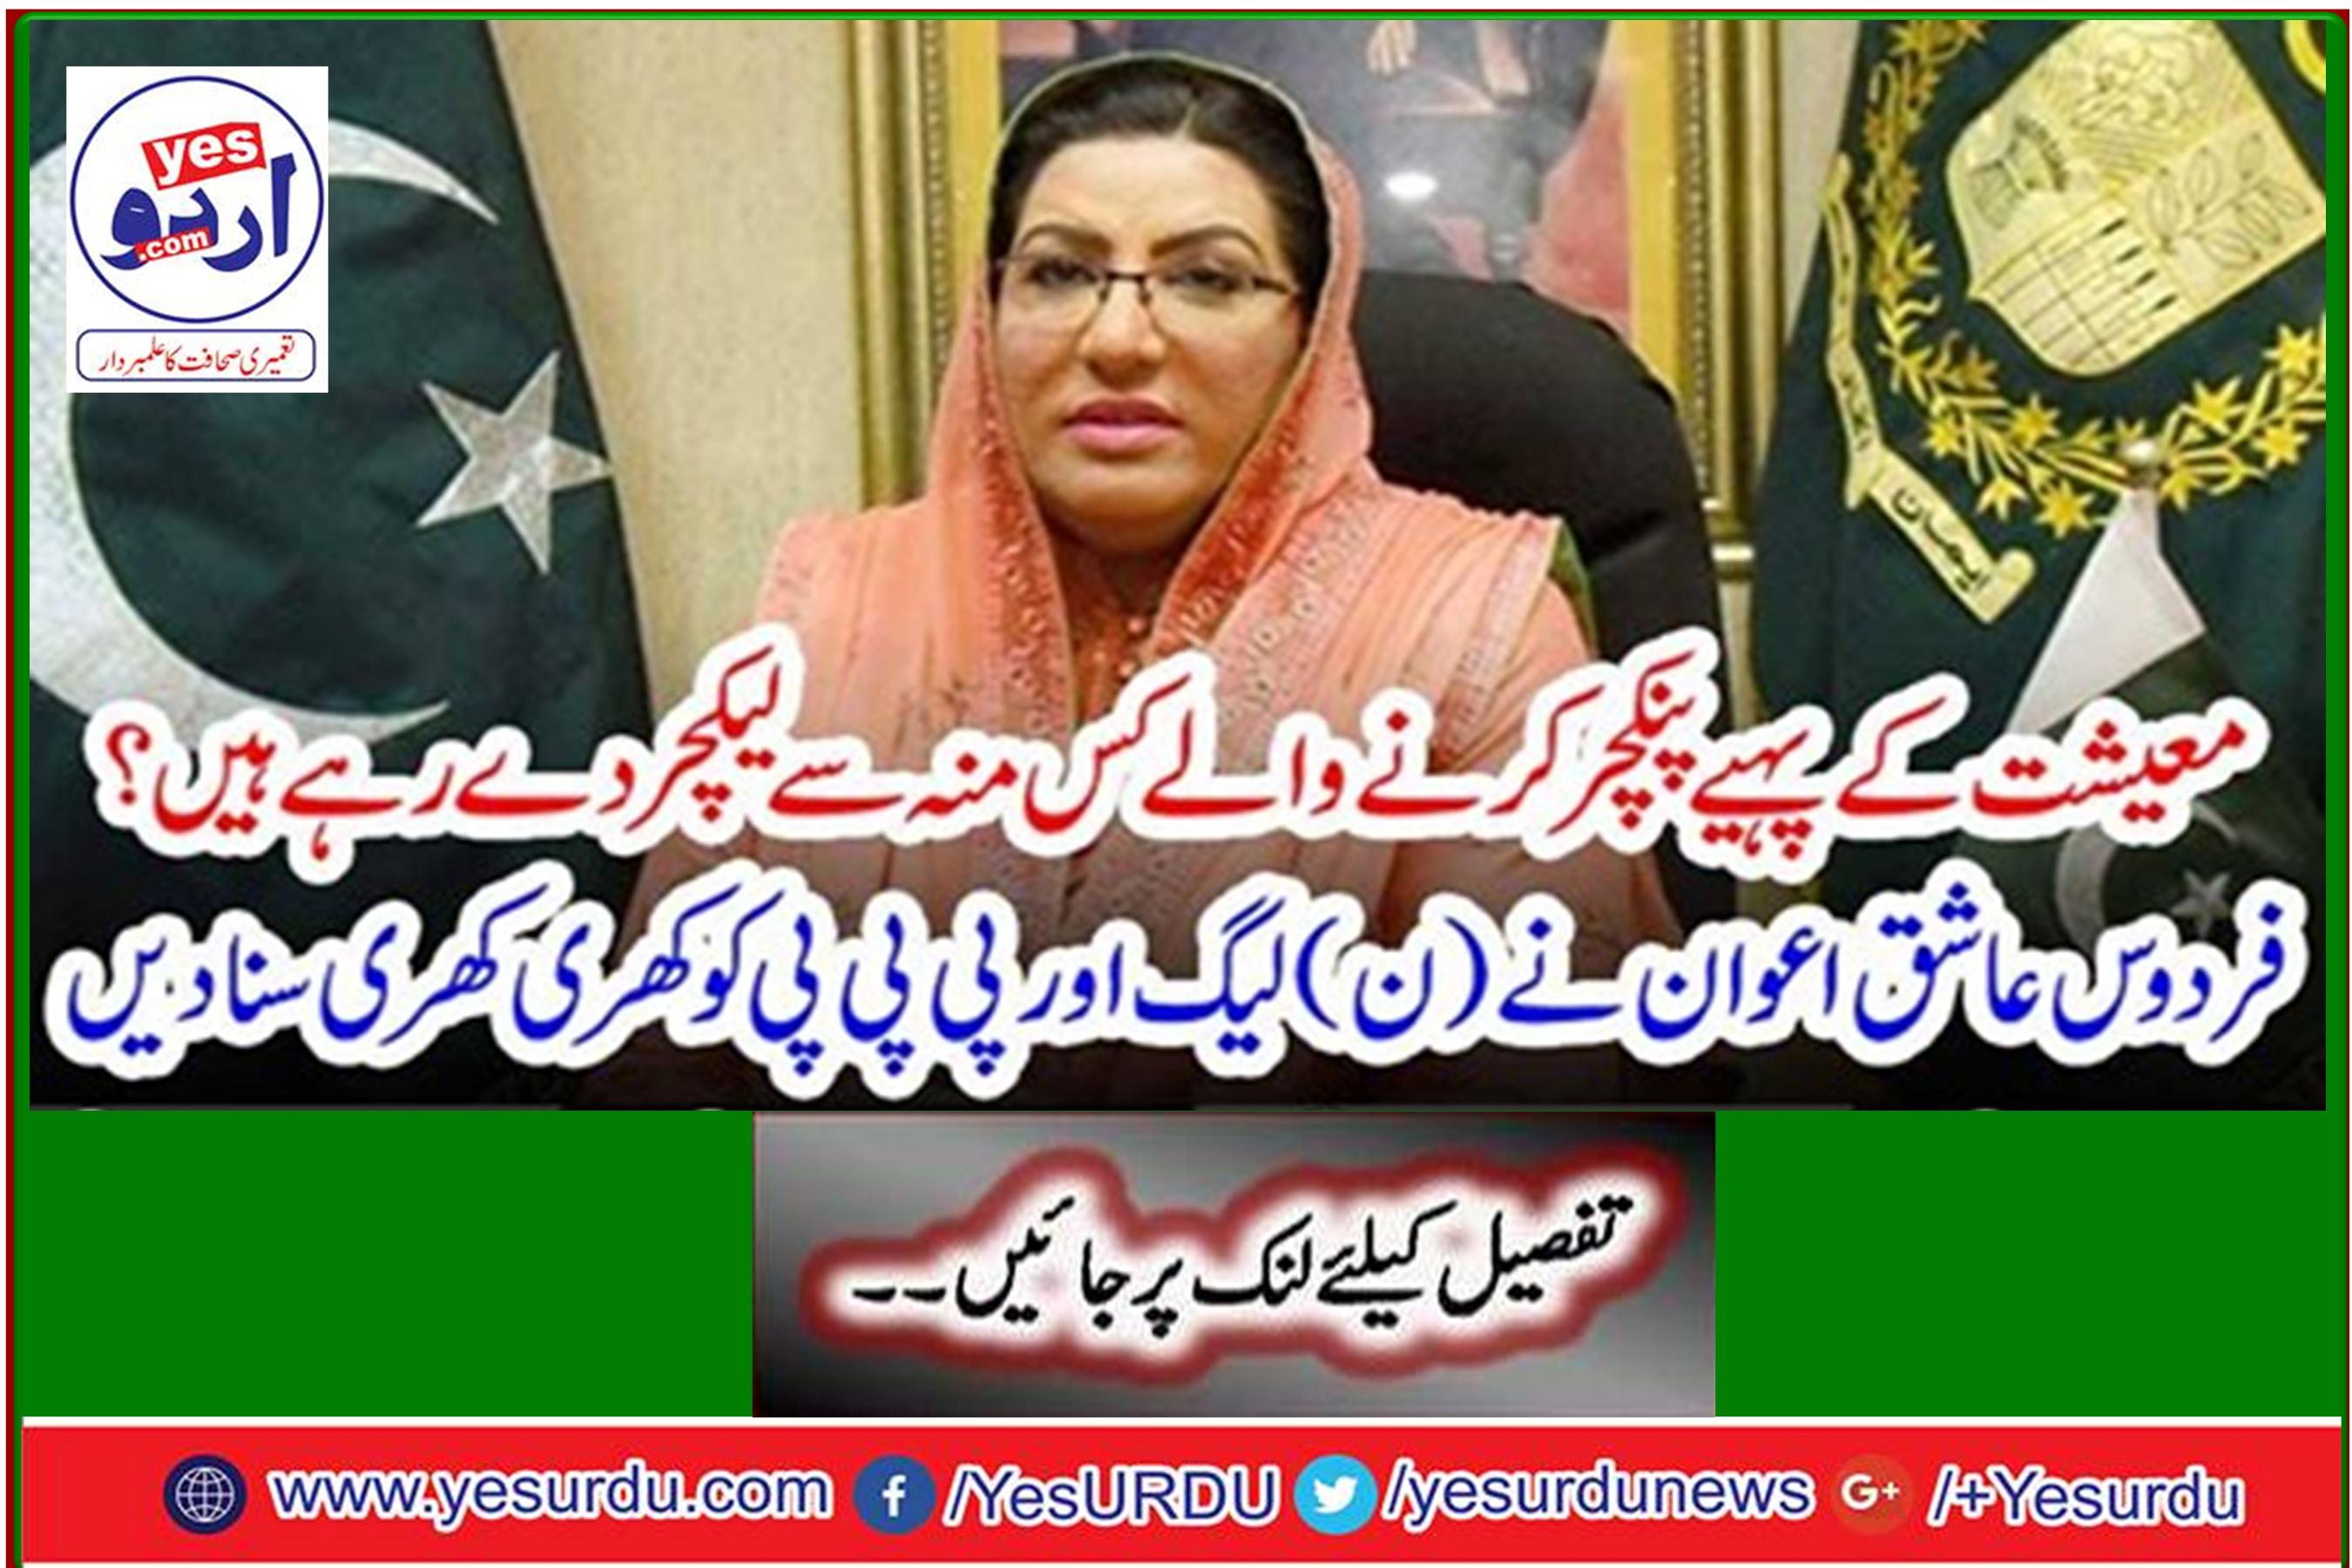 Economy Wheels From what mouth is the puncturer giving a lecture? Firdous Ashiq Awan slammed the PML-N and the PPP